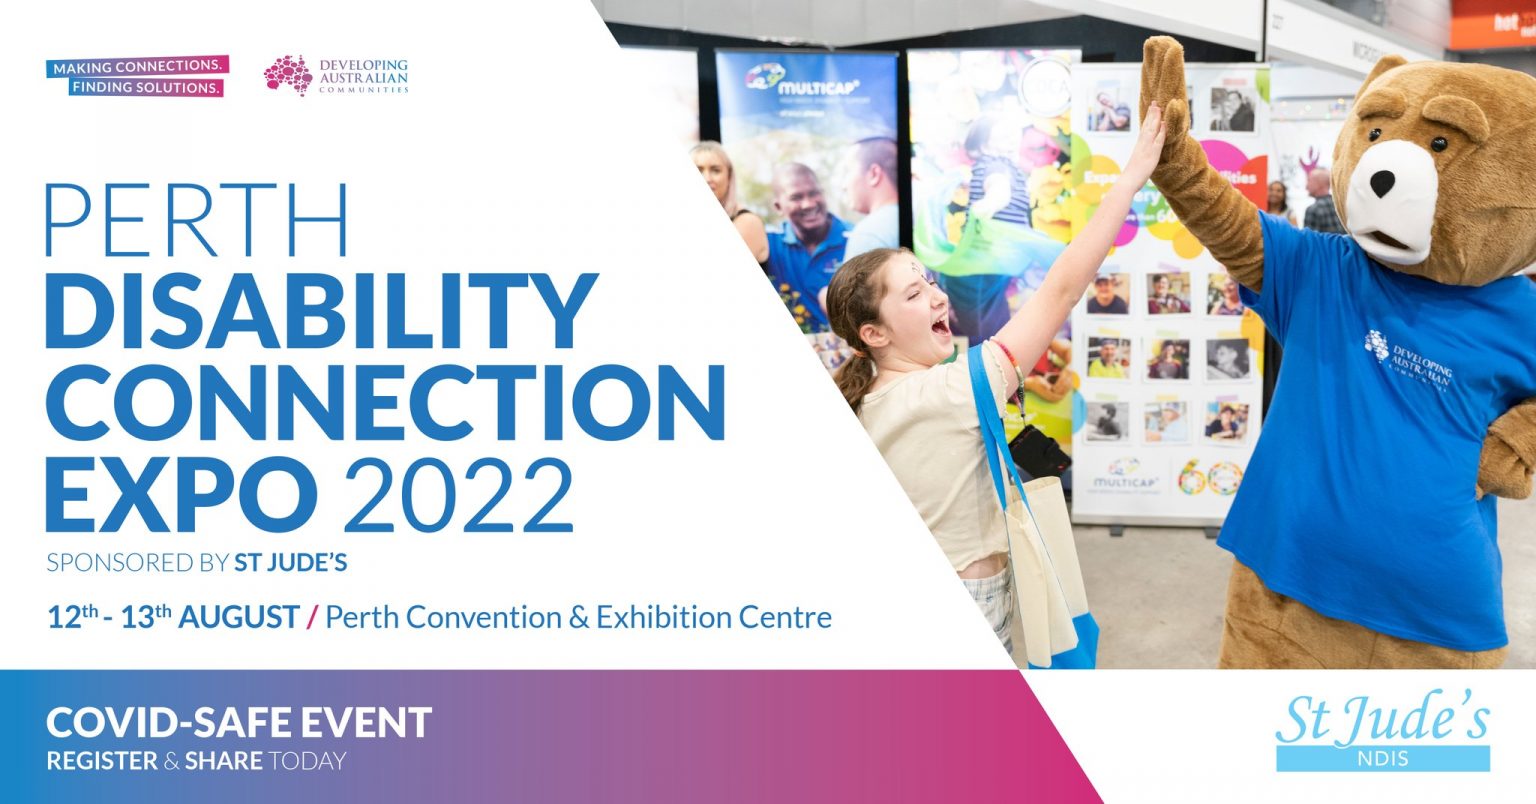 Perth-Disability-Connection-Expo-2022-sponsored-by-St-Judes